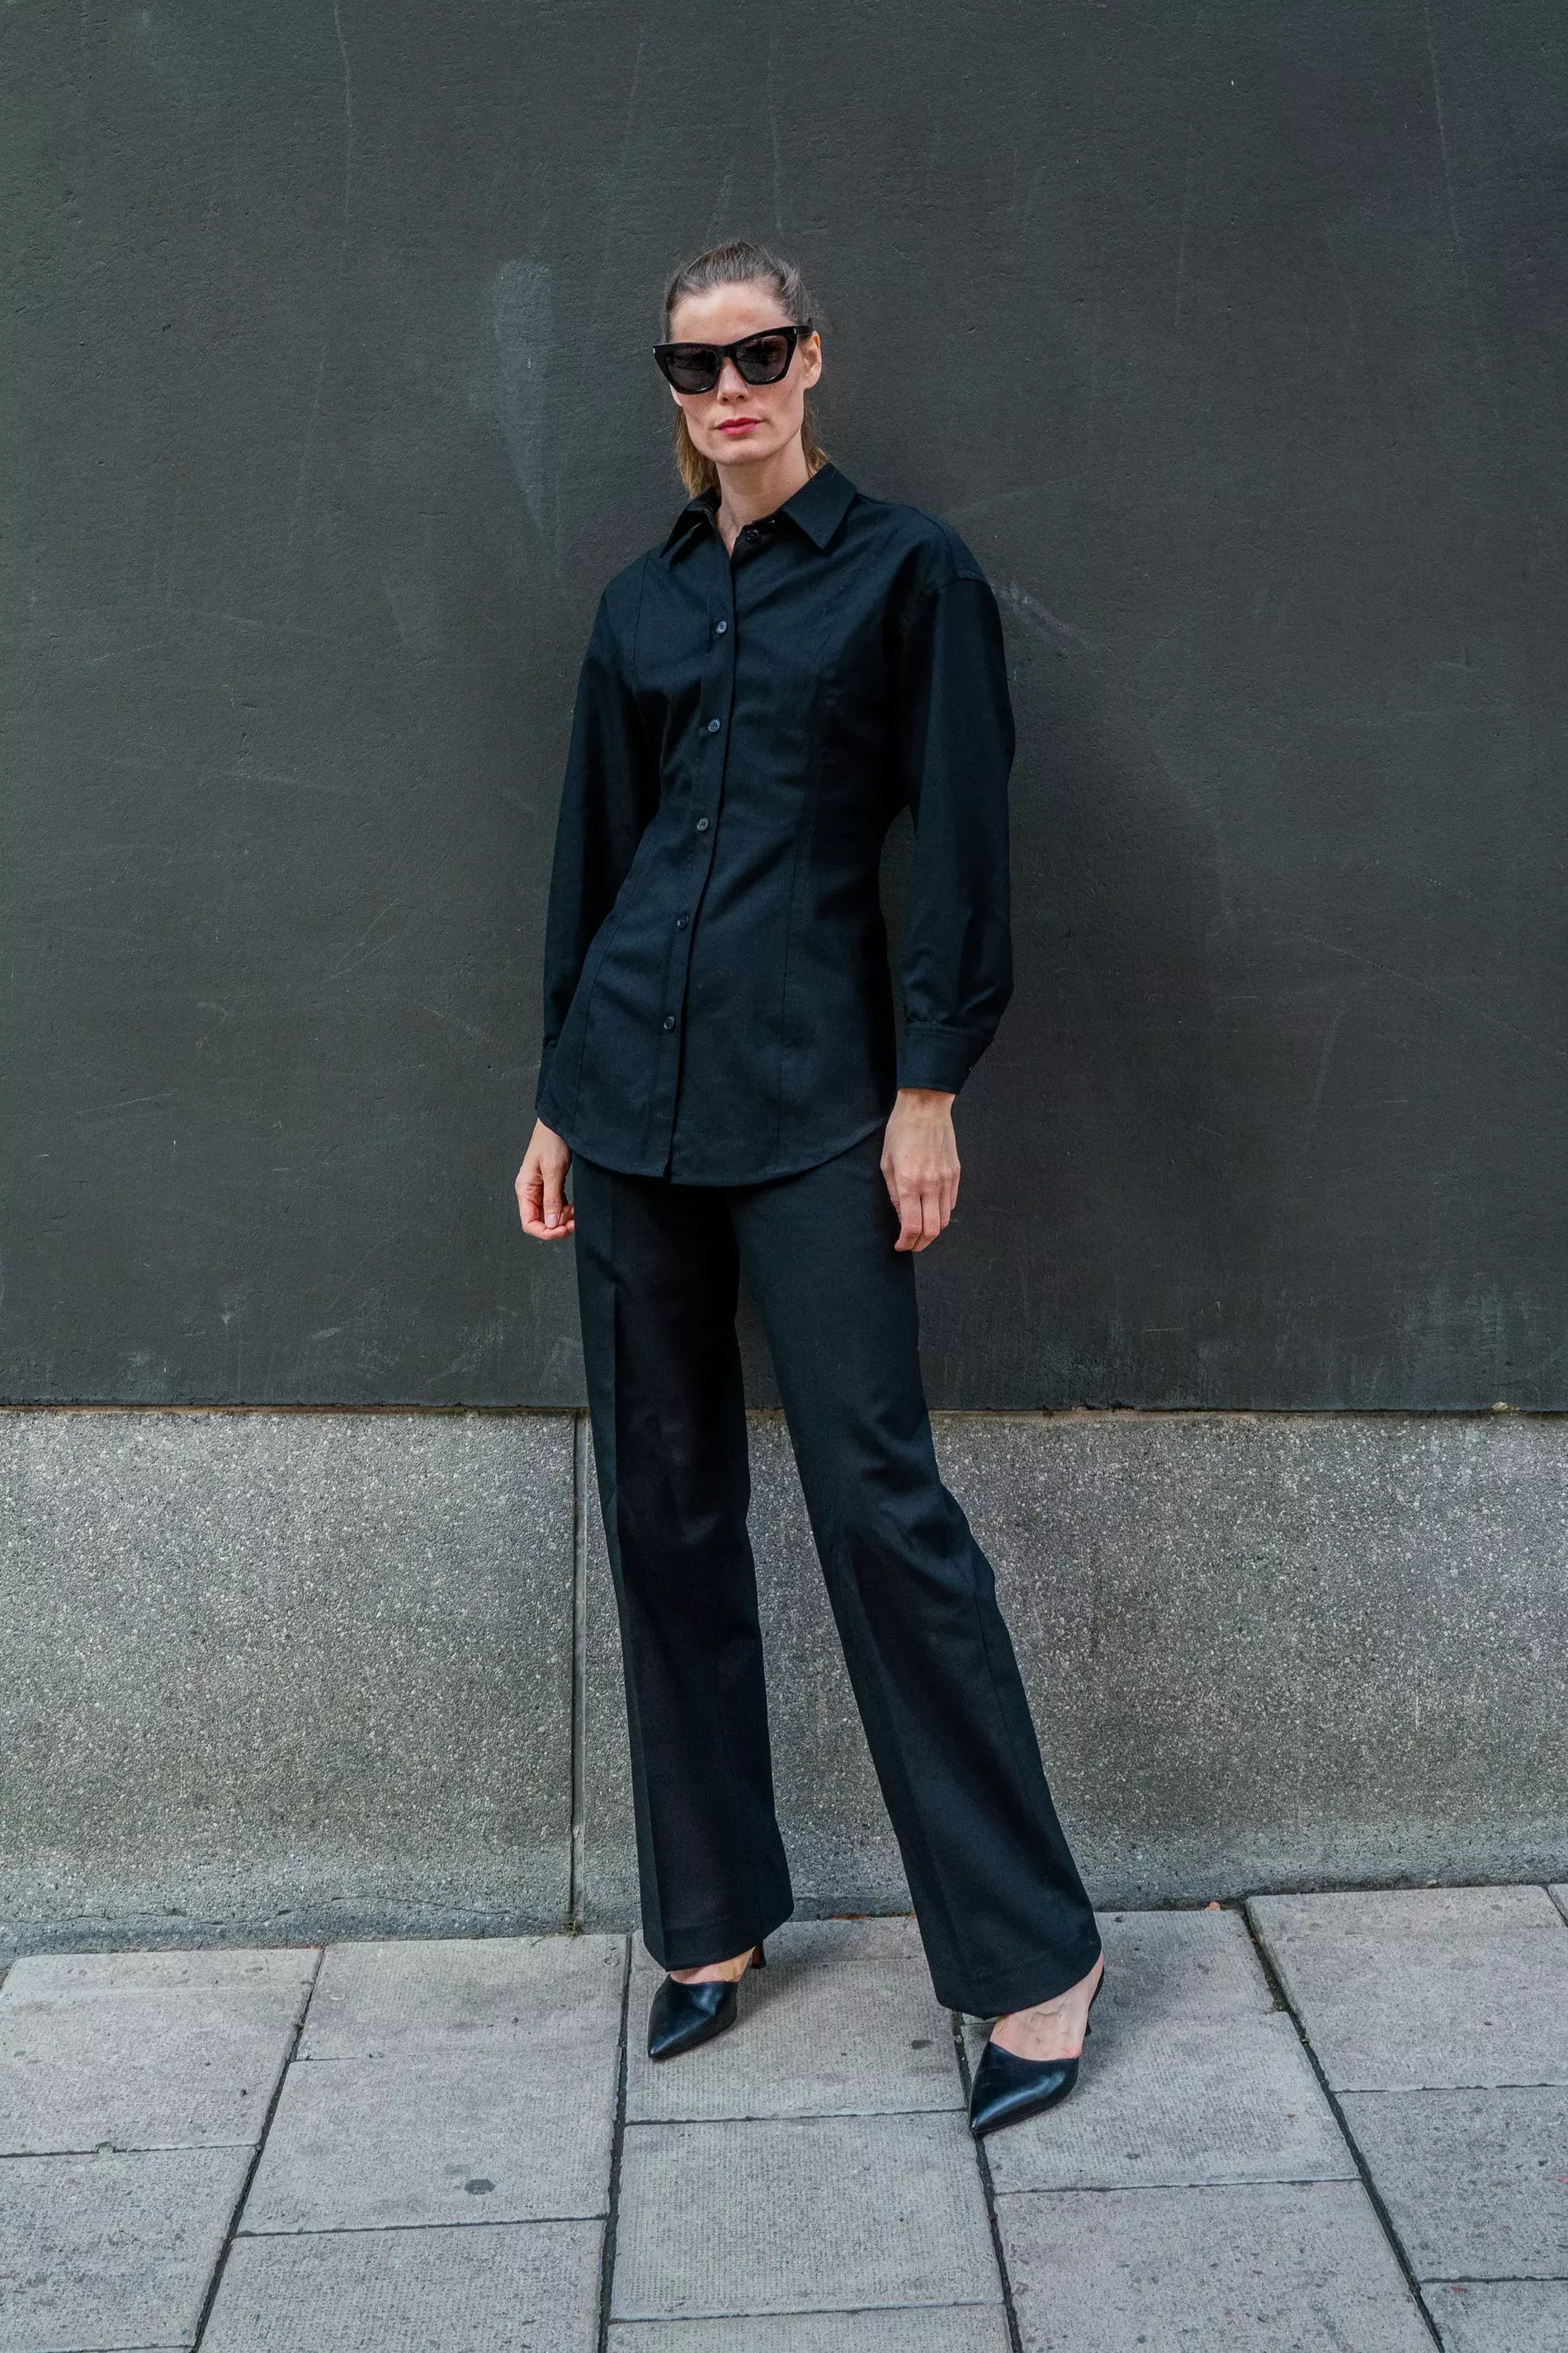 Stockholm Fashion Week guest pairs black blouse over black pants and heels 